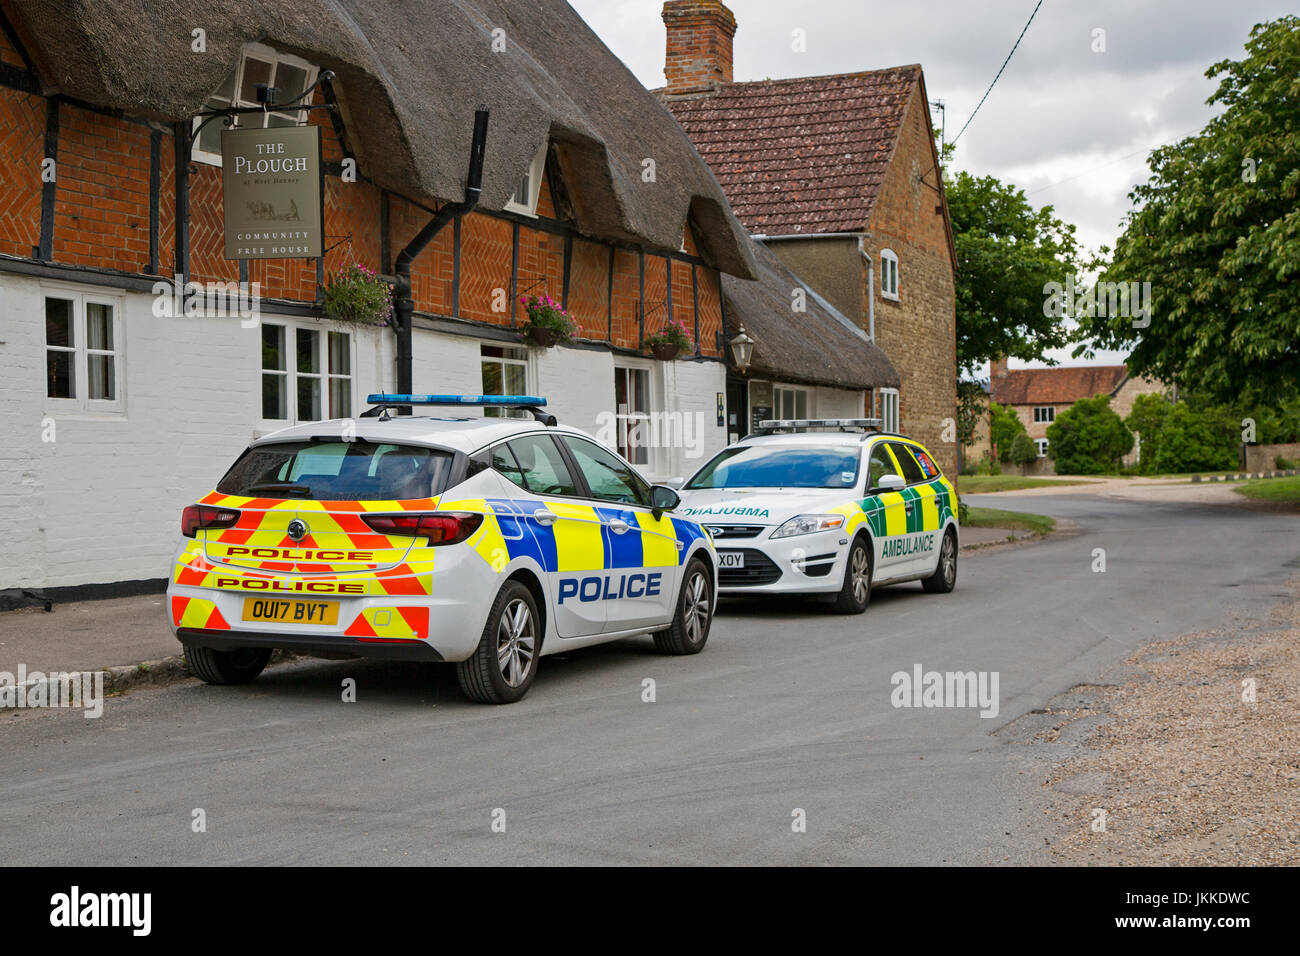 A police car and ambulance parked outside a pub in West Hanney, Wantage, Oxfordshire, UK. Stock Photo